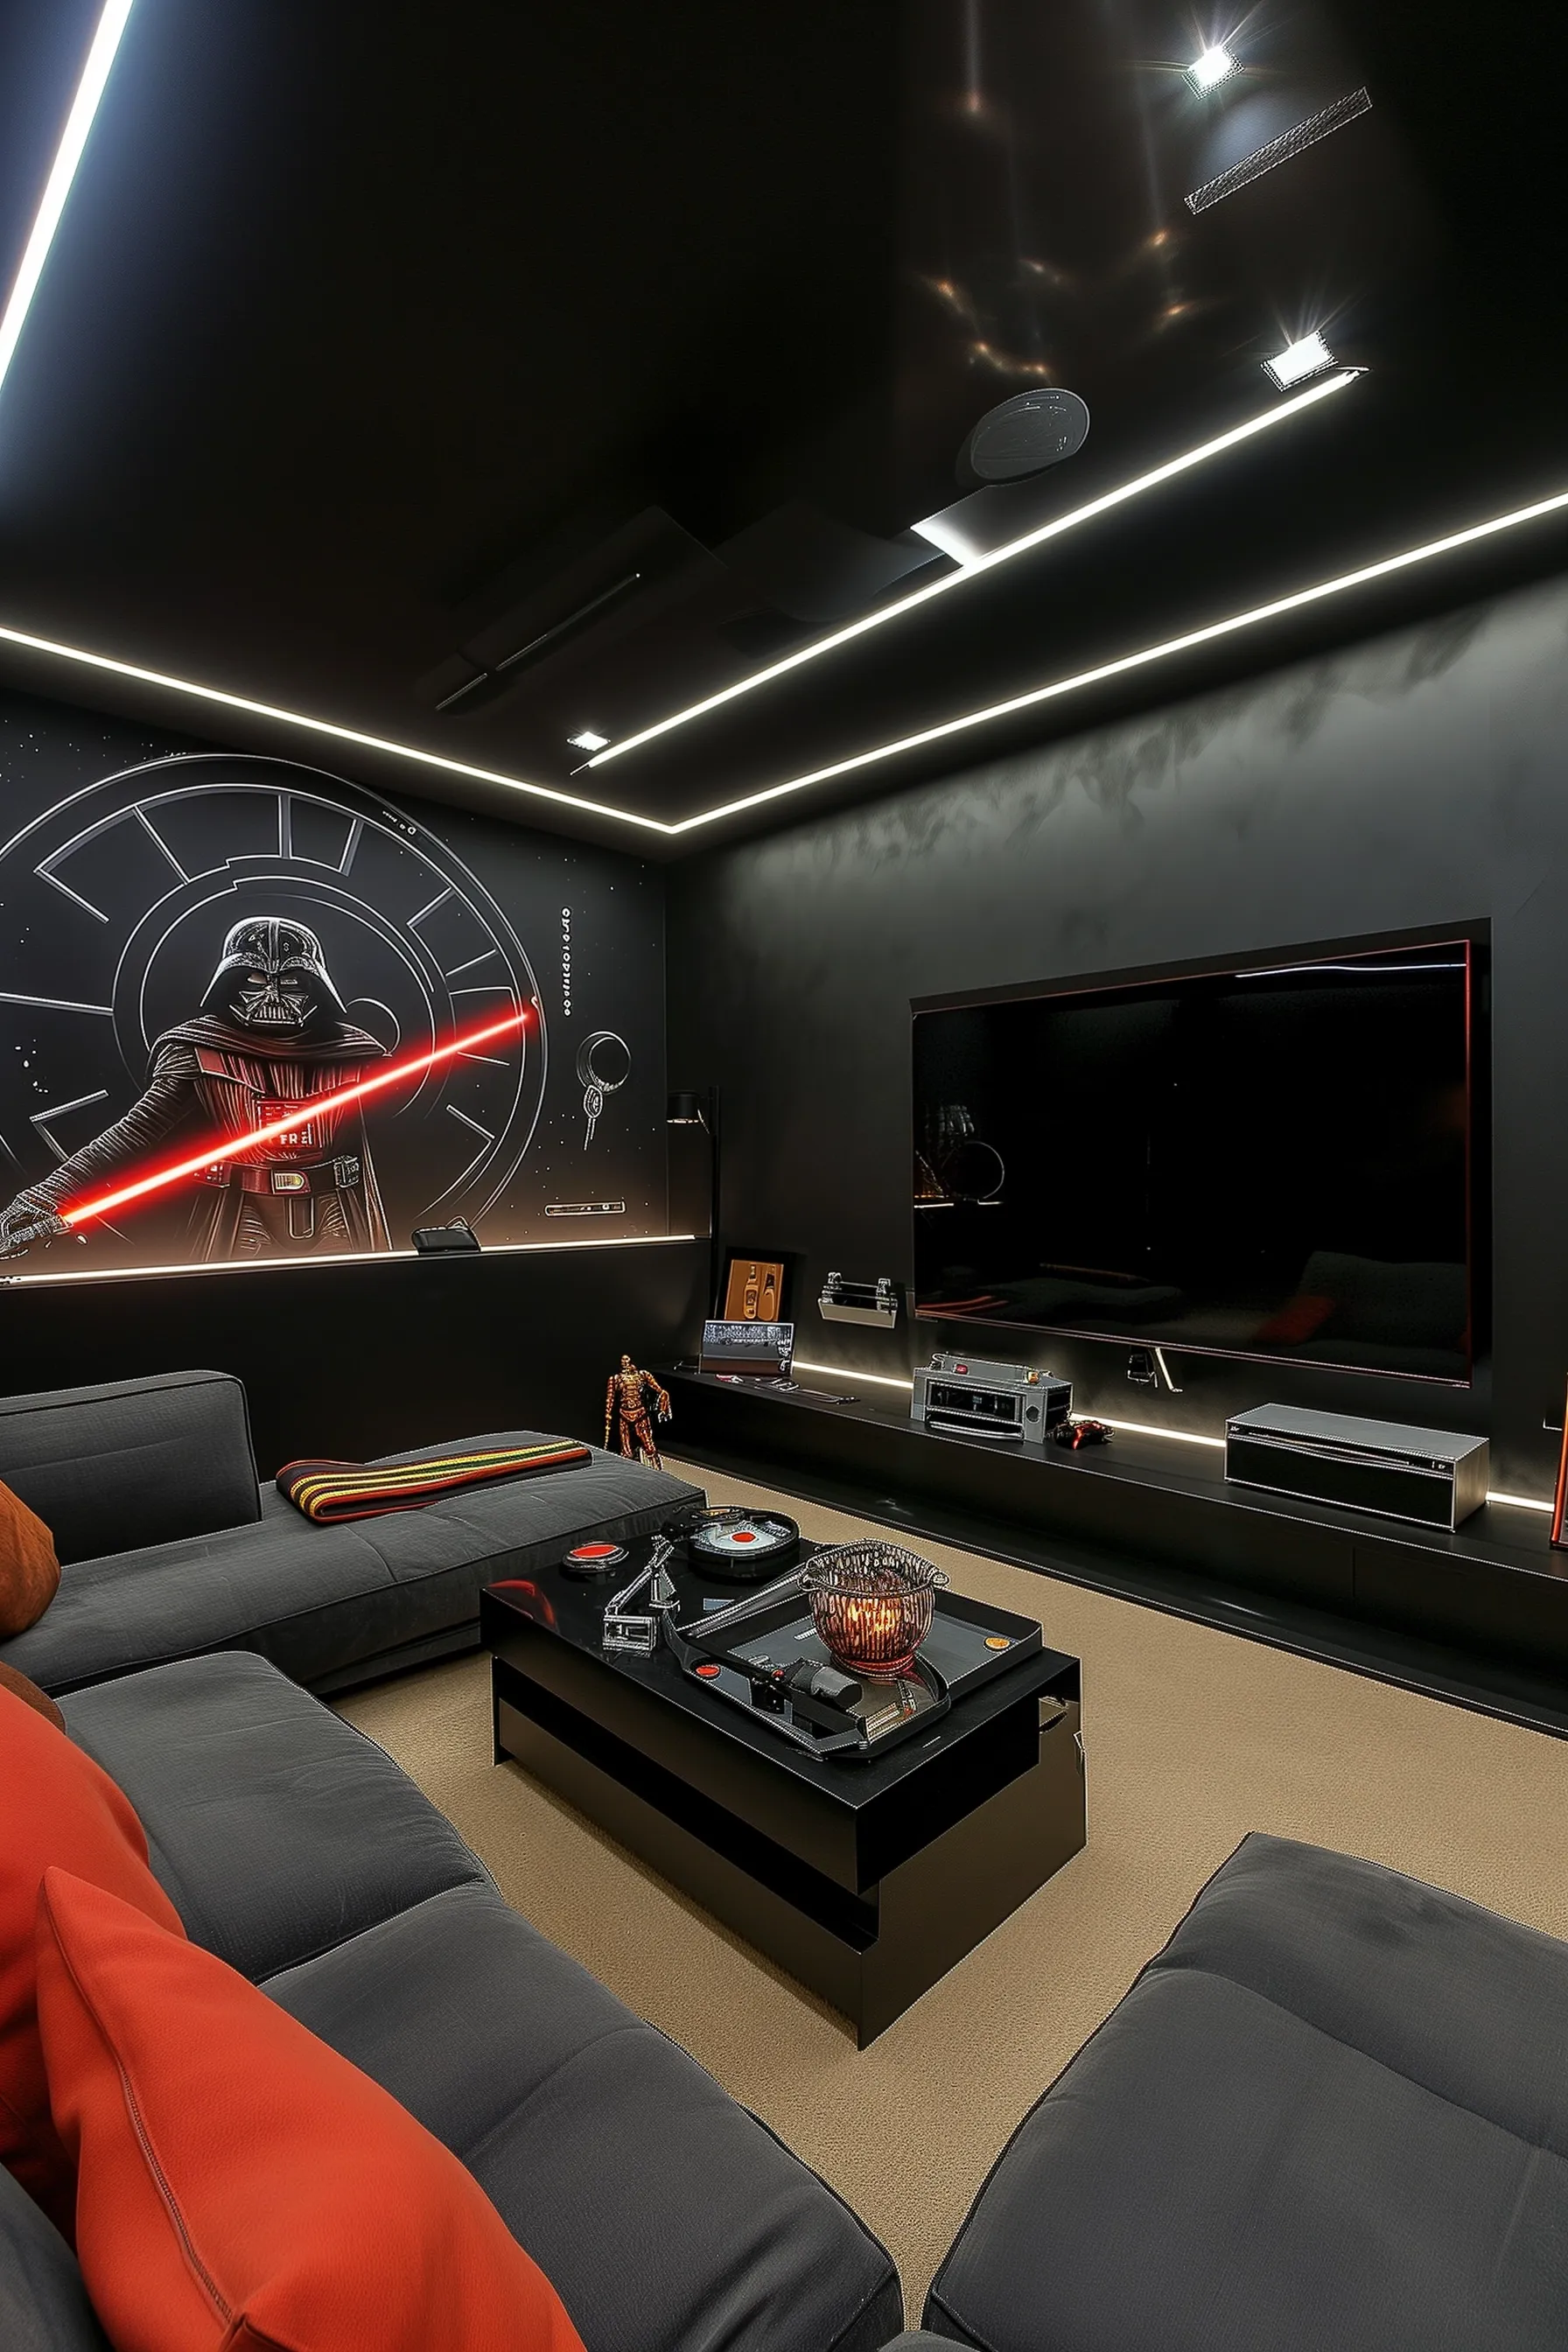 A star wars themed game room with  a black couch